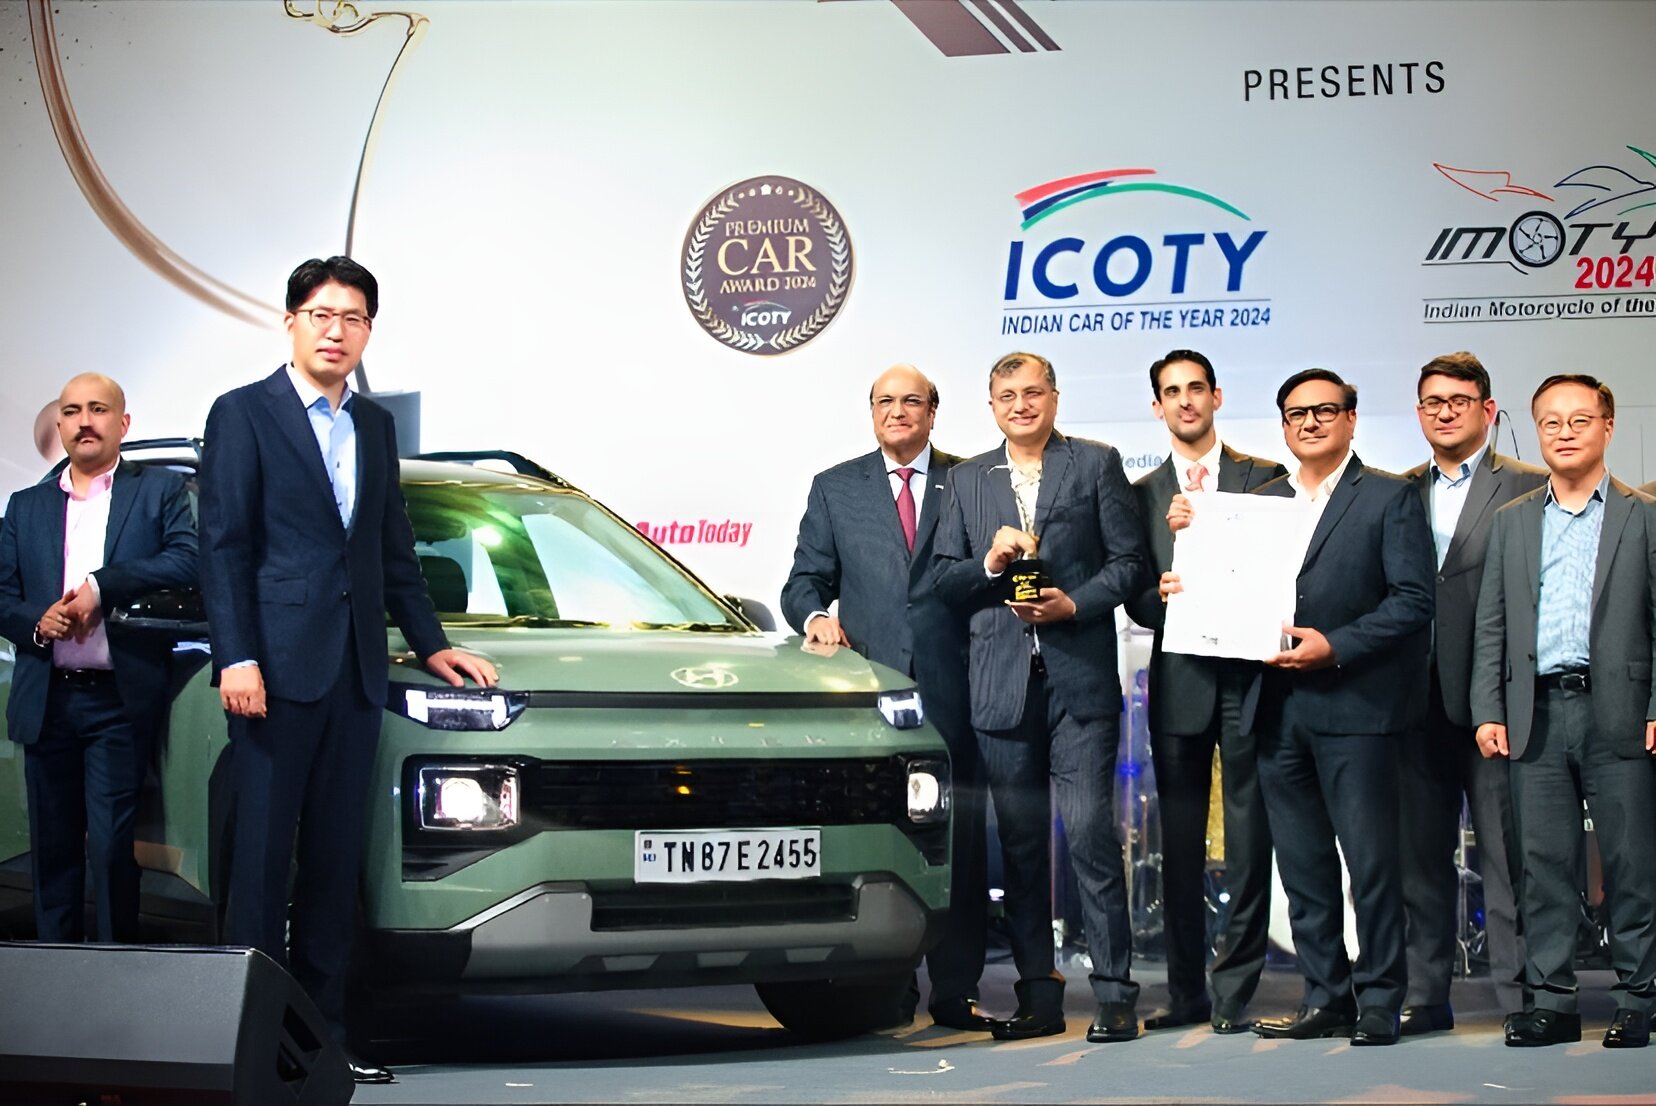 ICOTY 2024 WINNER Hyundai Exter The 2024 Indian Car of the Year award was won by the Hyundai Exter, with the Maruti Suzuki Jimny securing the first runner-up position and the Honda Elevate and Toyota Innova Hycorss as the second runner-up. For the 19th season of ICOTY, a roster of 8 cars emerged as contenders, featuring the Honda Elevate, Hyundai Verna, Maruti Suzuki Jimny, Hyundai Exter, Mahindra XUV400, Citroen C3 Aircross, MG Comet, and Toyota Innova Hycross. It is worth noting that the ICOTY winners over the past four years have been the Kia Carens, Mahindra XUV700, Hyundai i20, and Hyundai Venue.